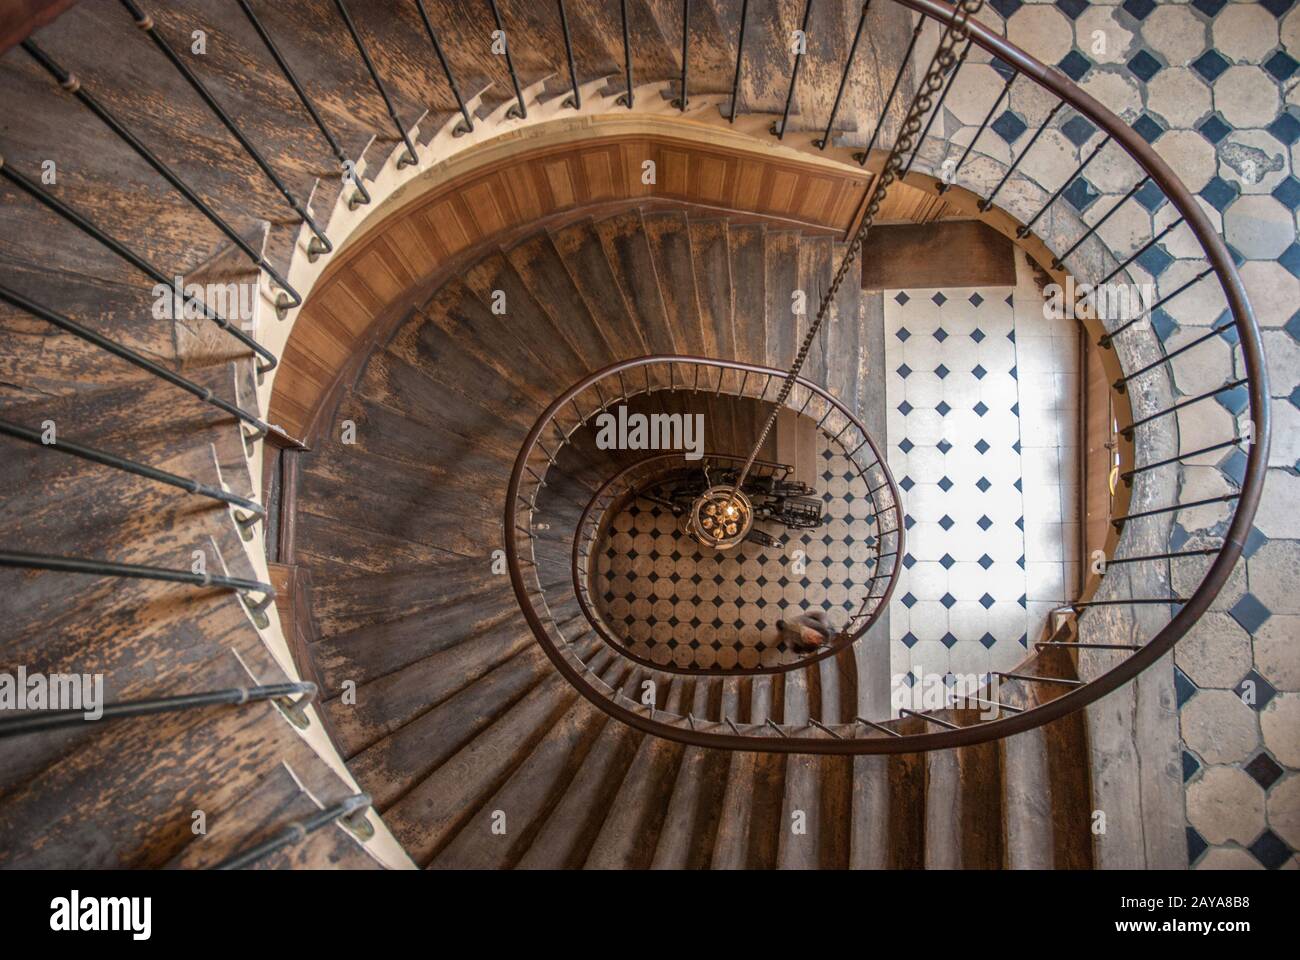 Paris, France - August 05, 2006: Beautiful vintage high spiral staircase in the gallery of Vivienne. Top view Stock Photo